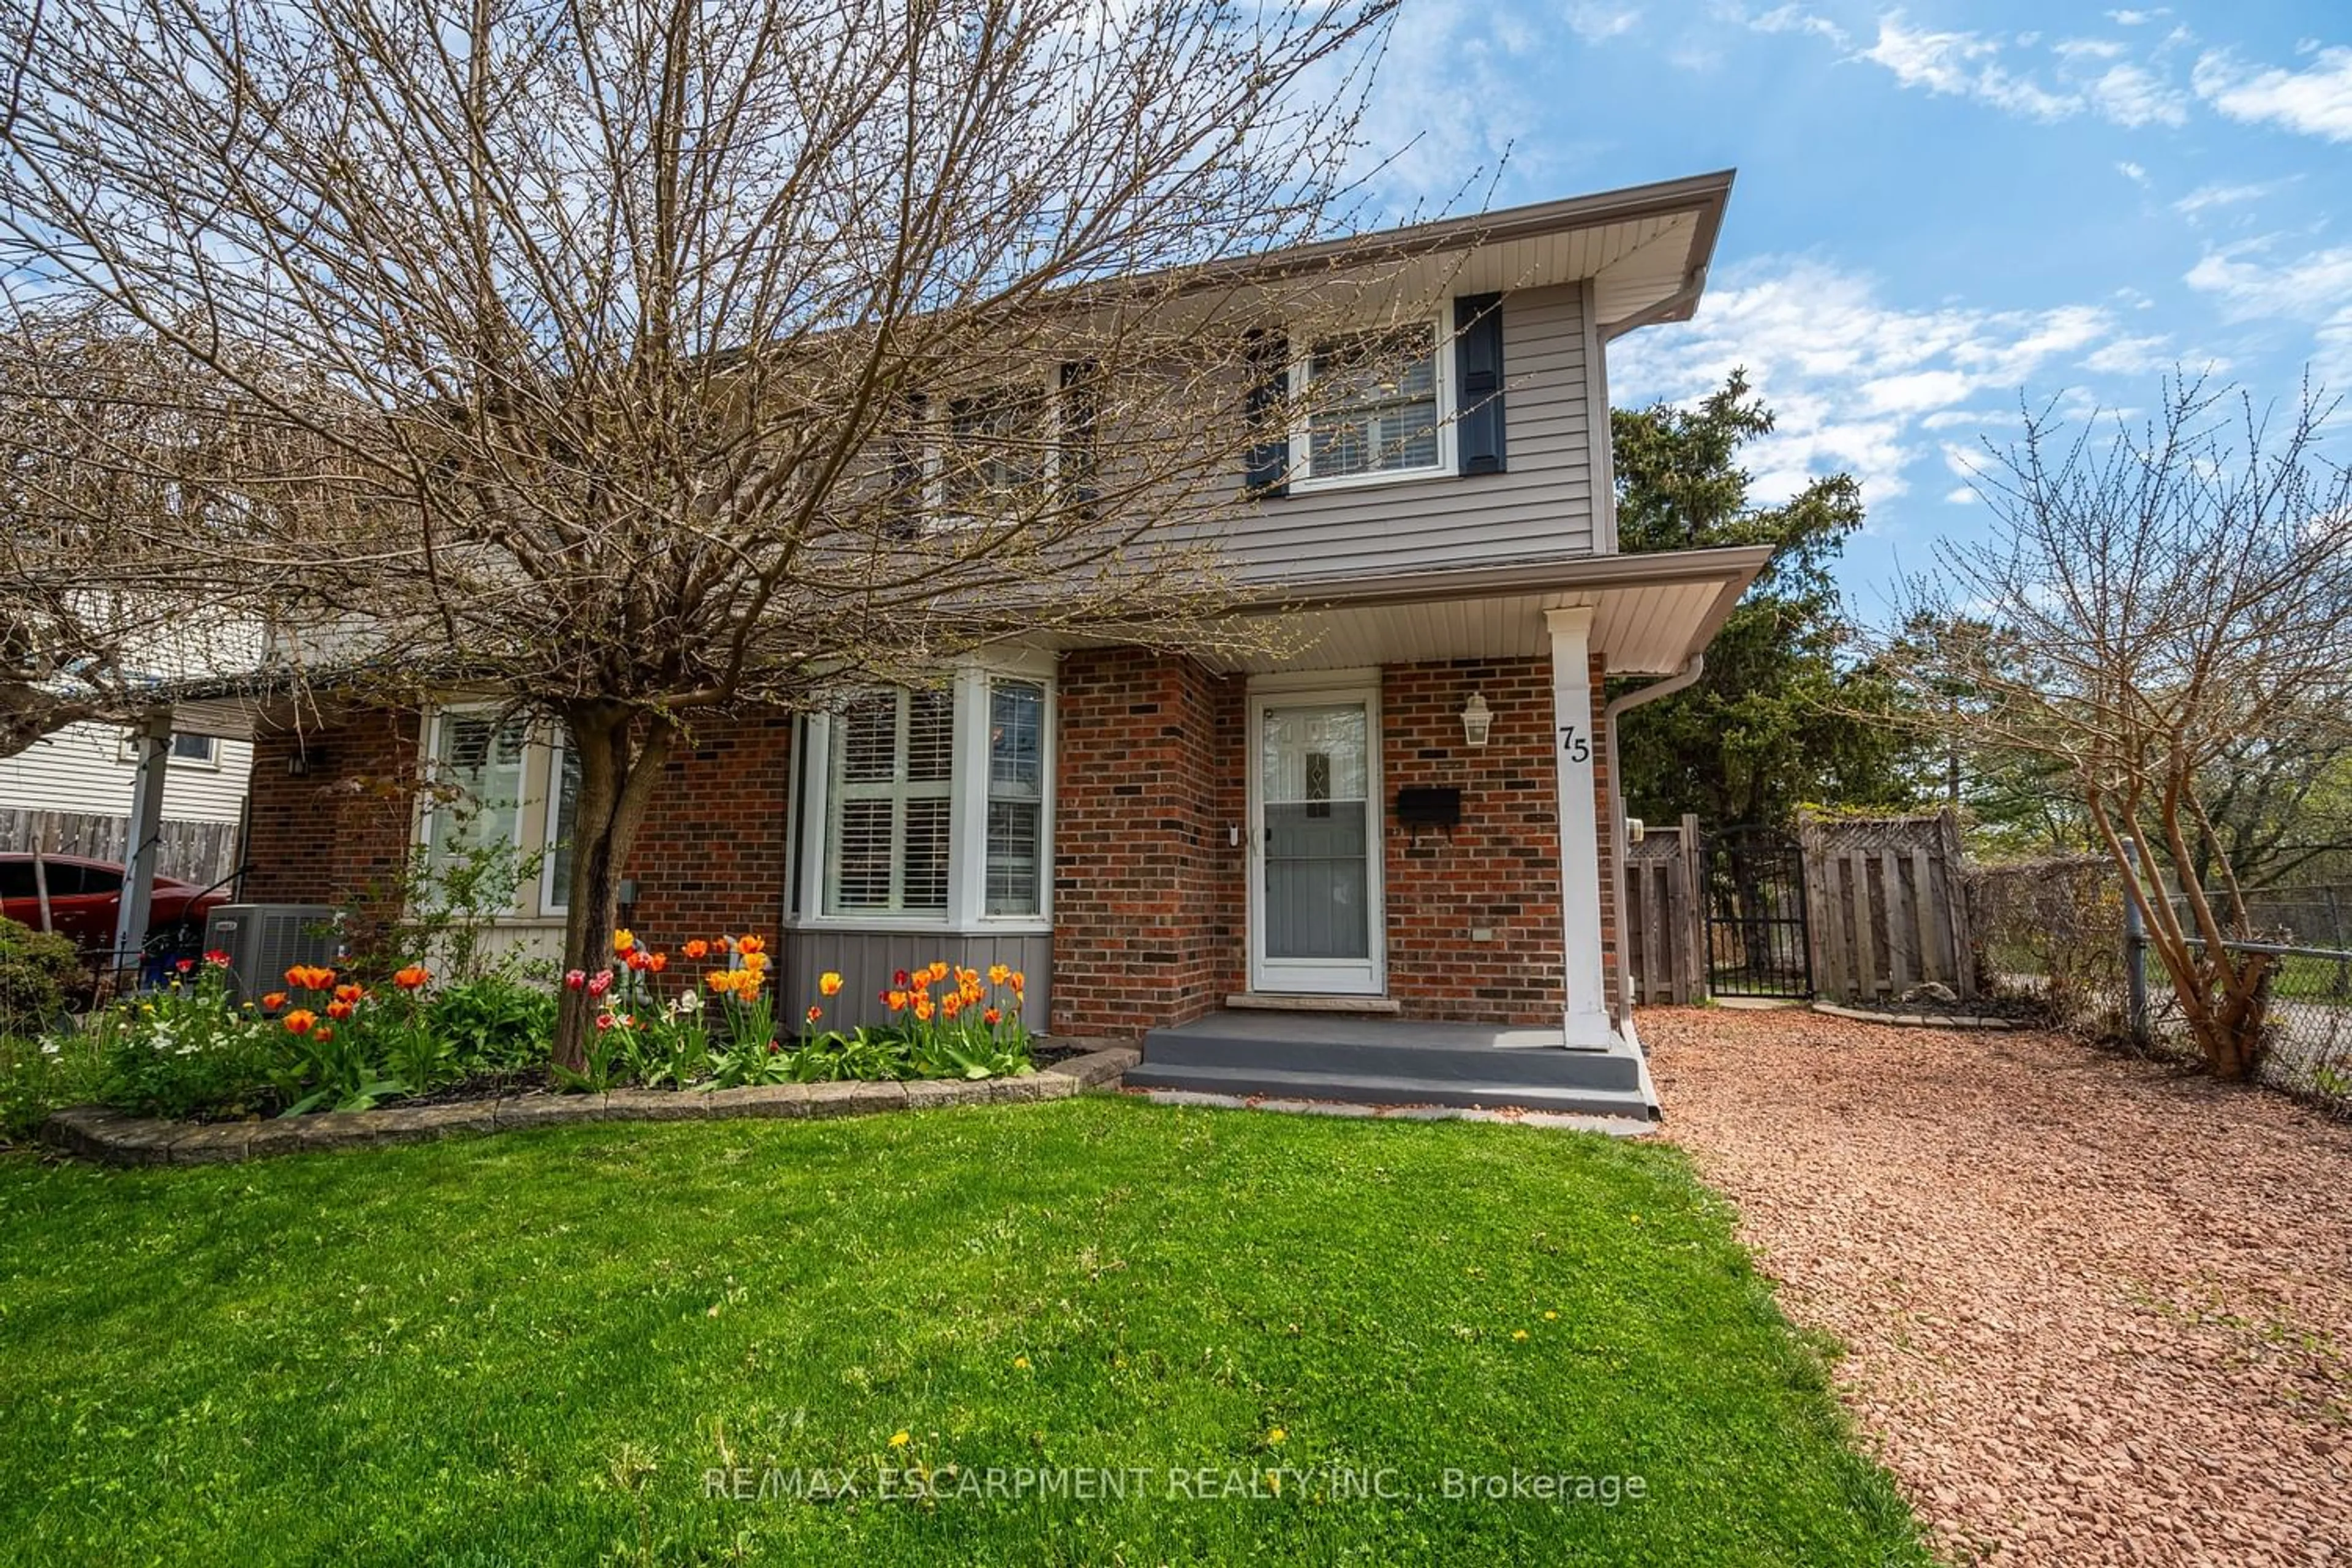 Home with brick exterior material for 75 Dundonald St, St. Catharines Ontario L2P 3T4